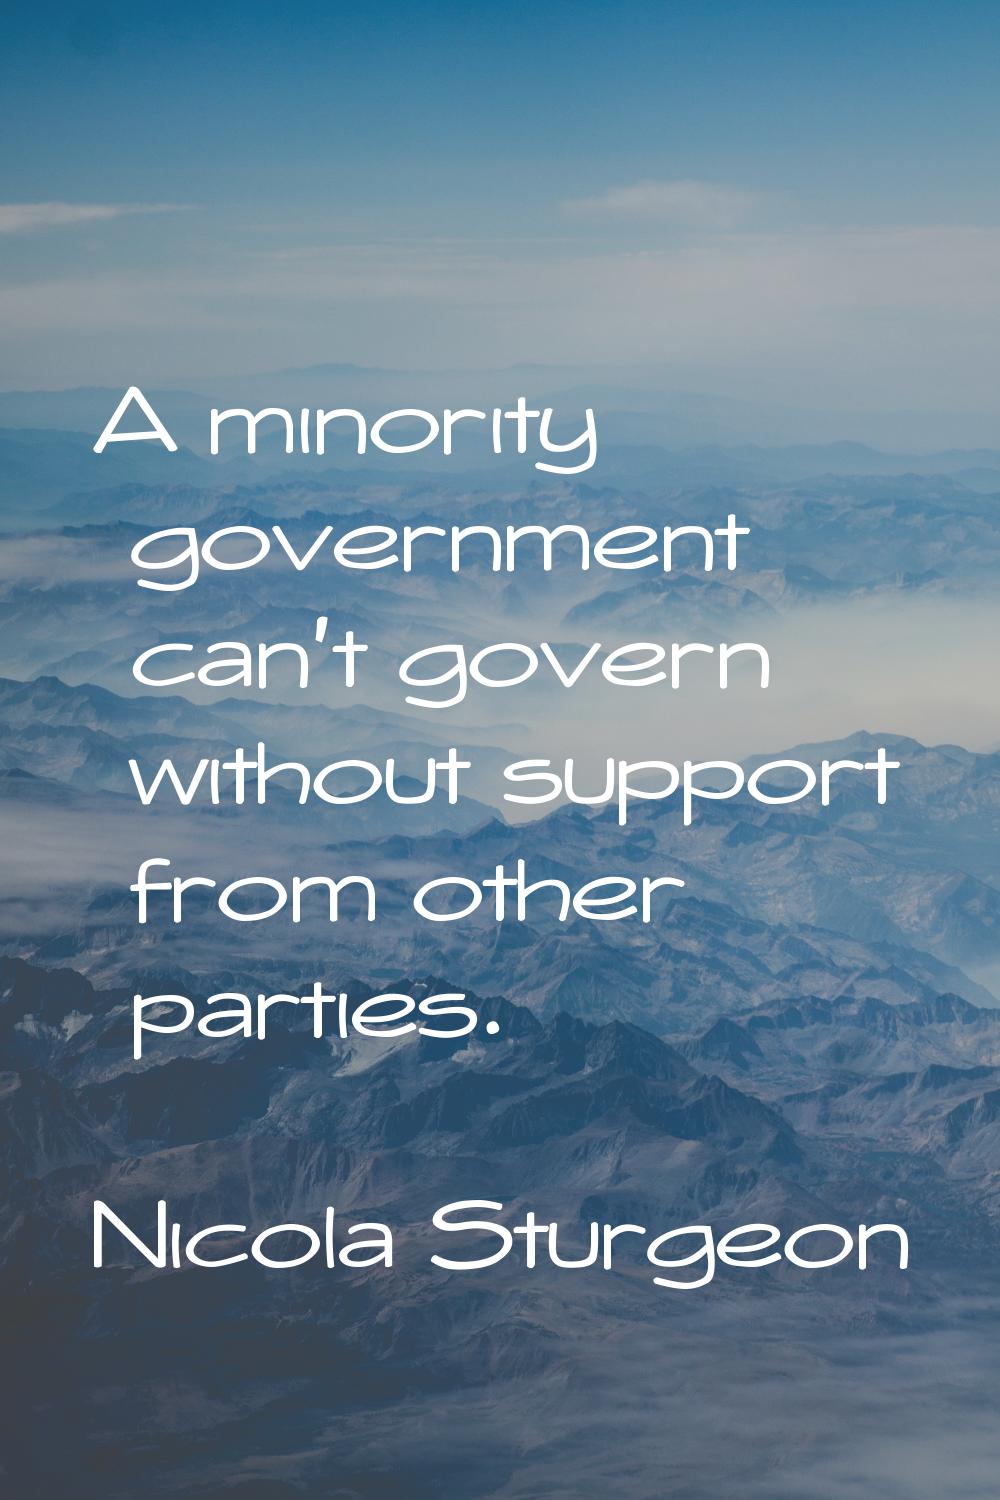 A minority government can't govern without support from other parties.